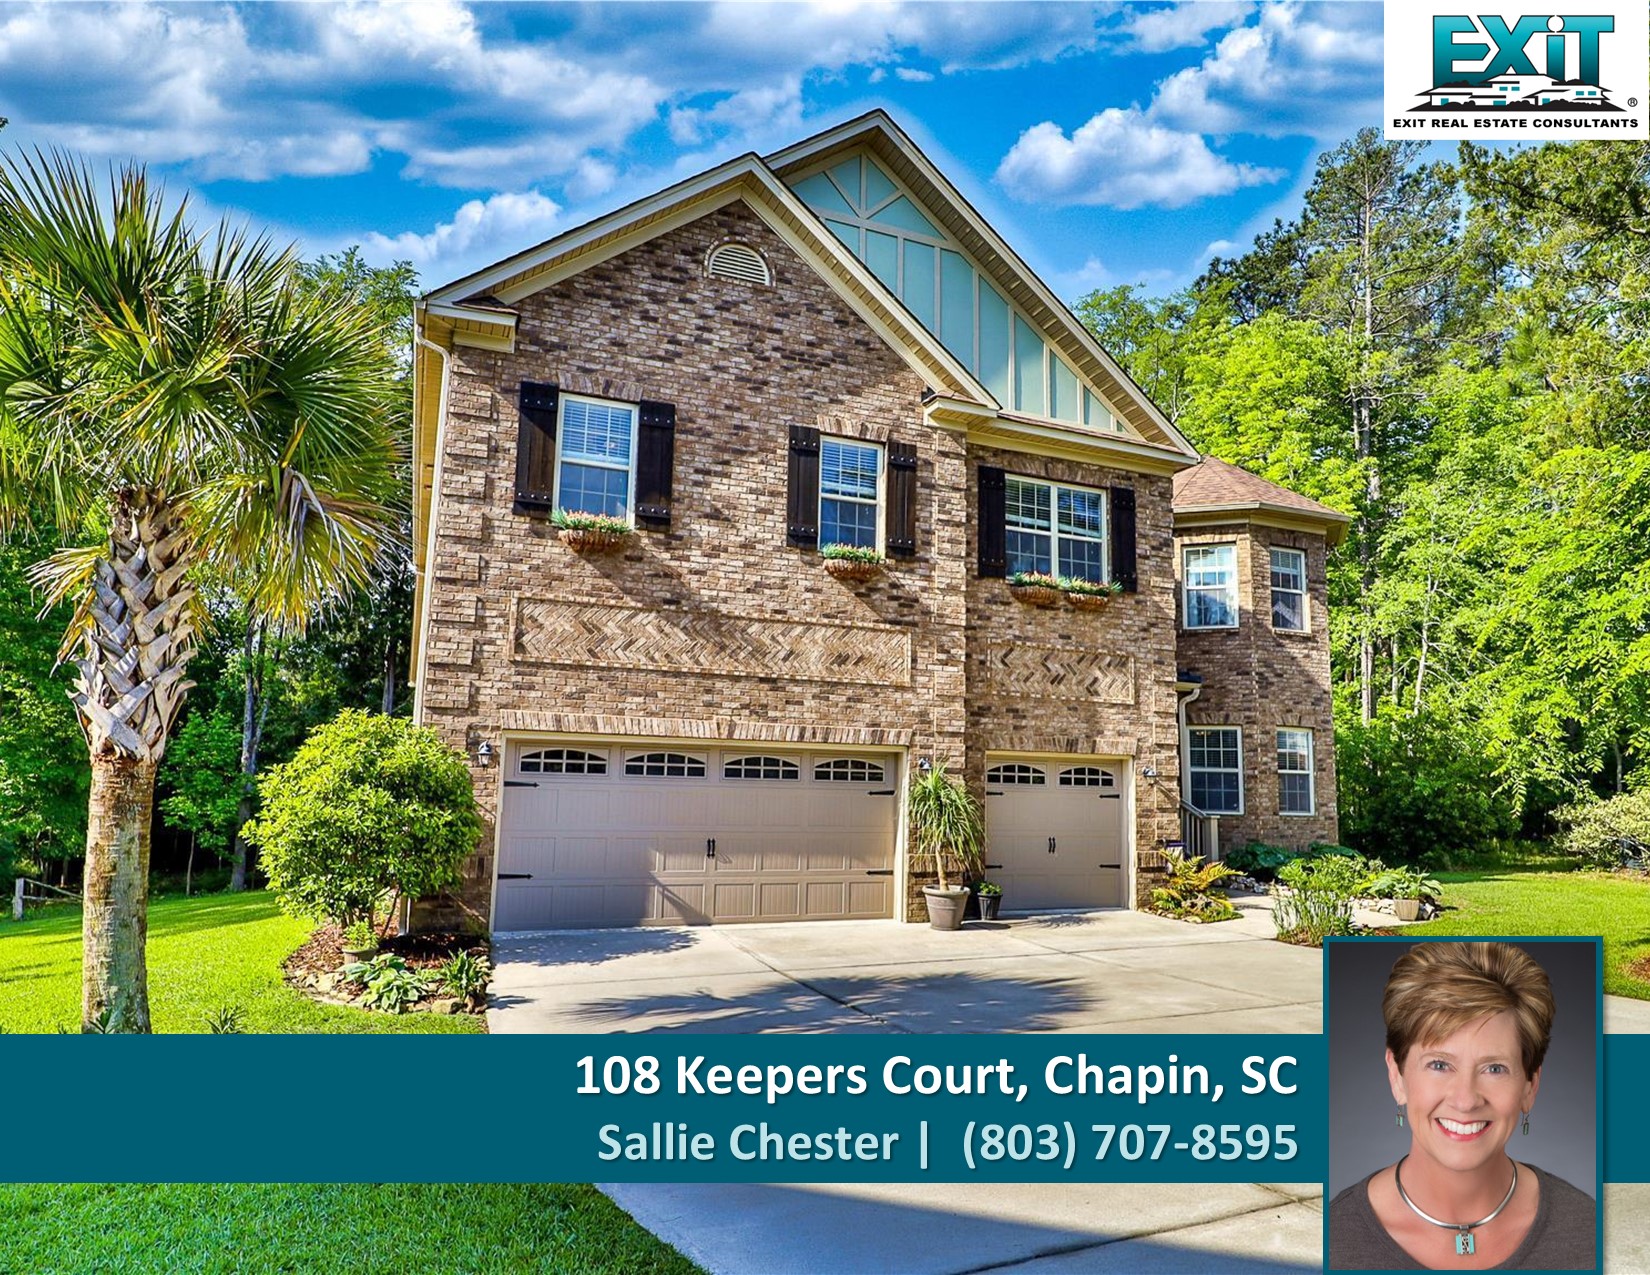 Just listed in Night Harbor - Chapin